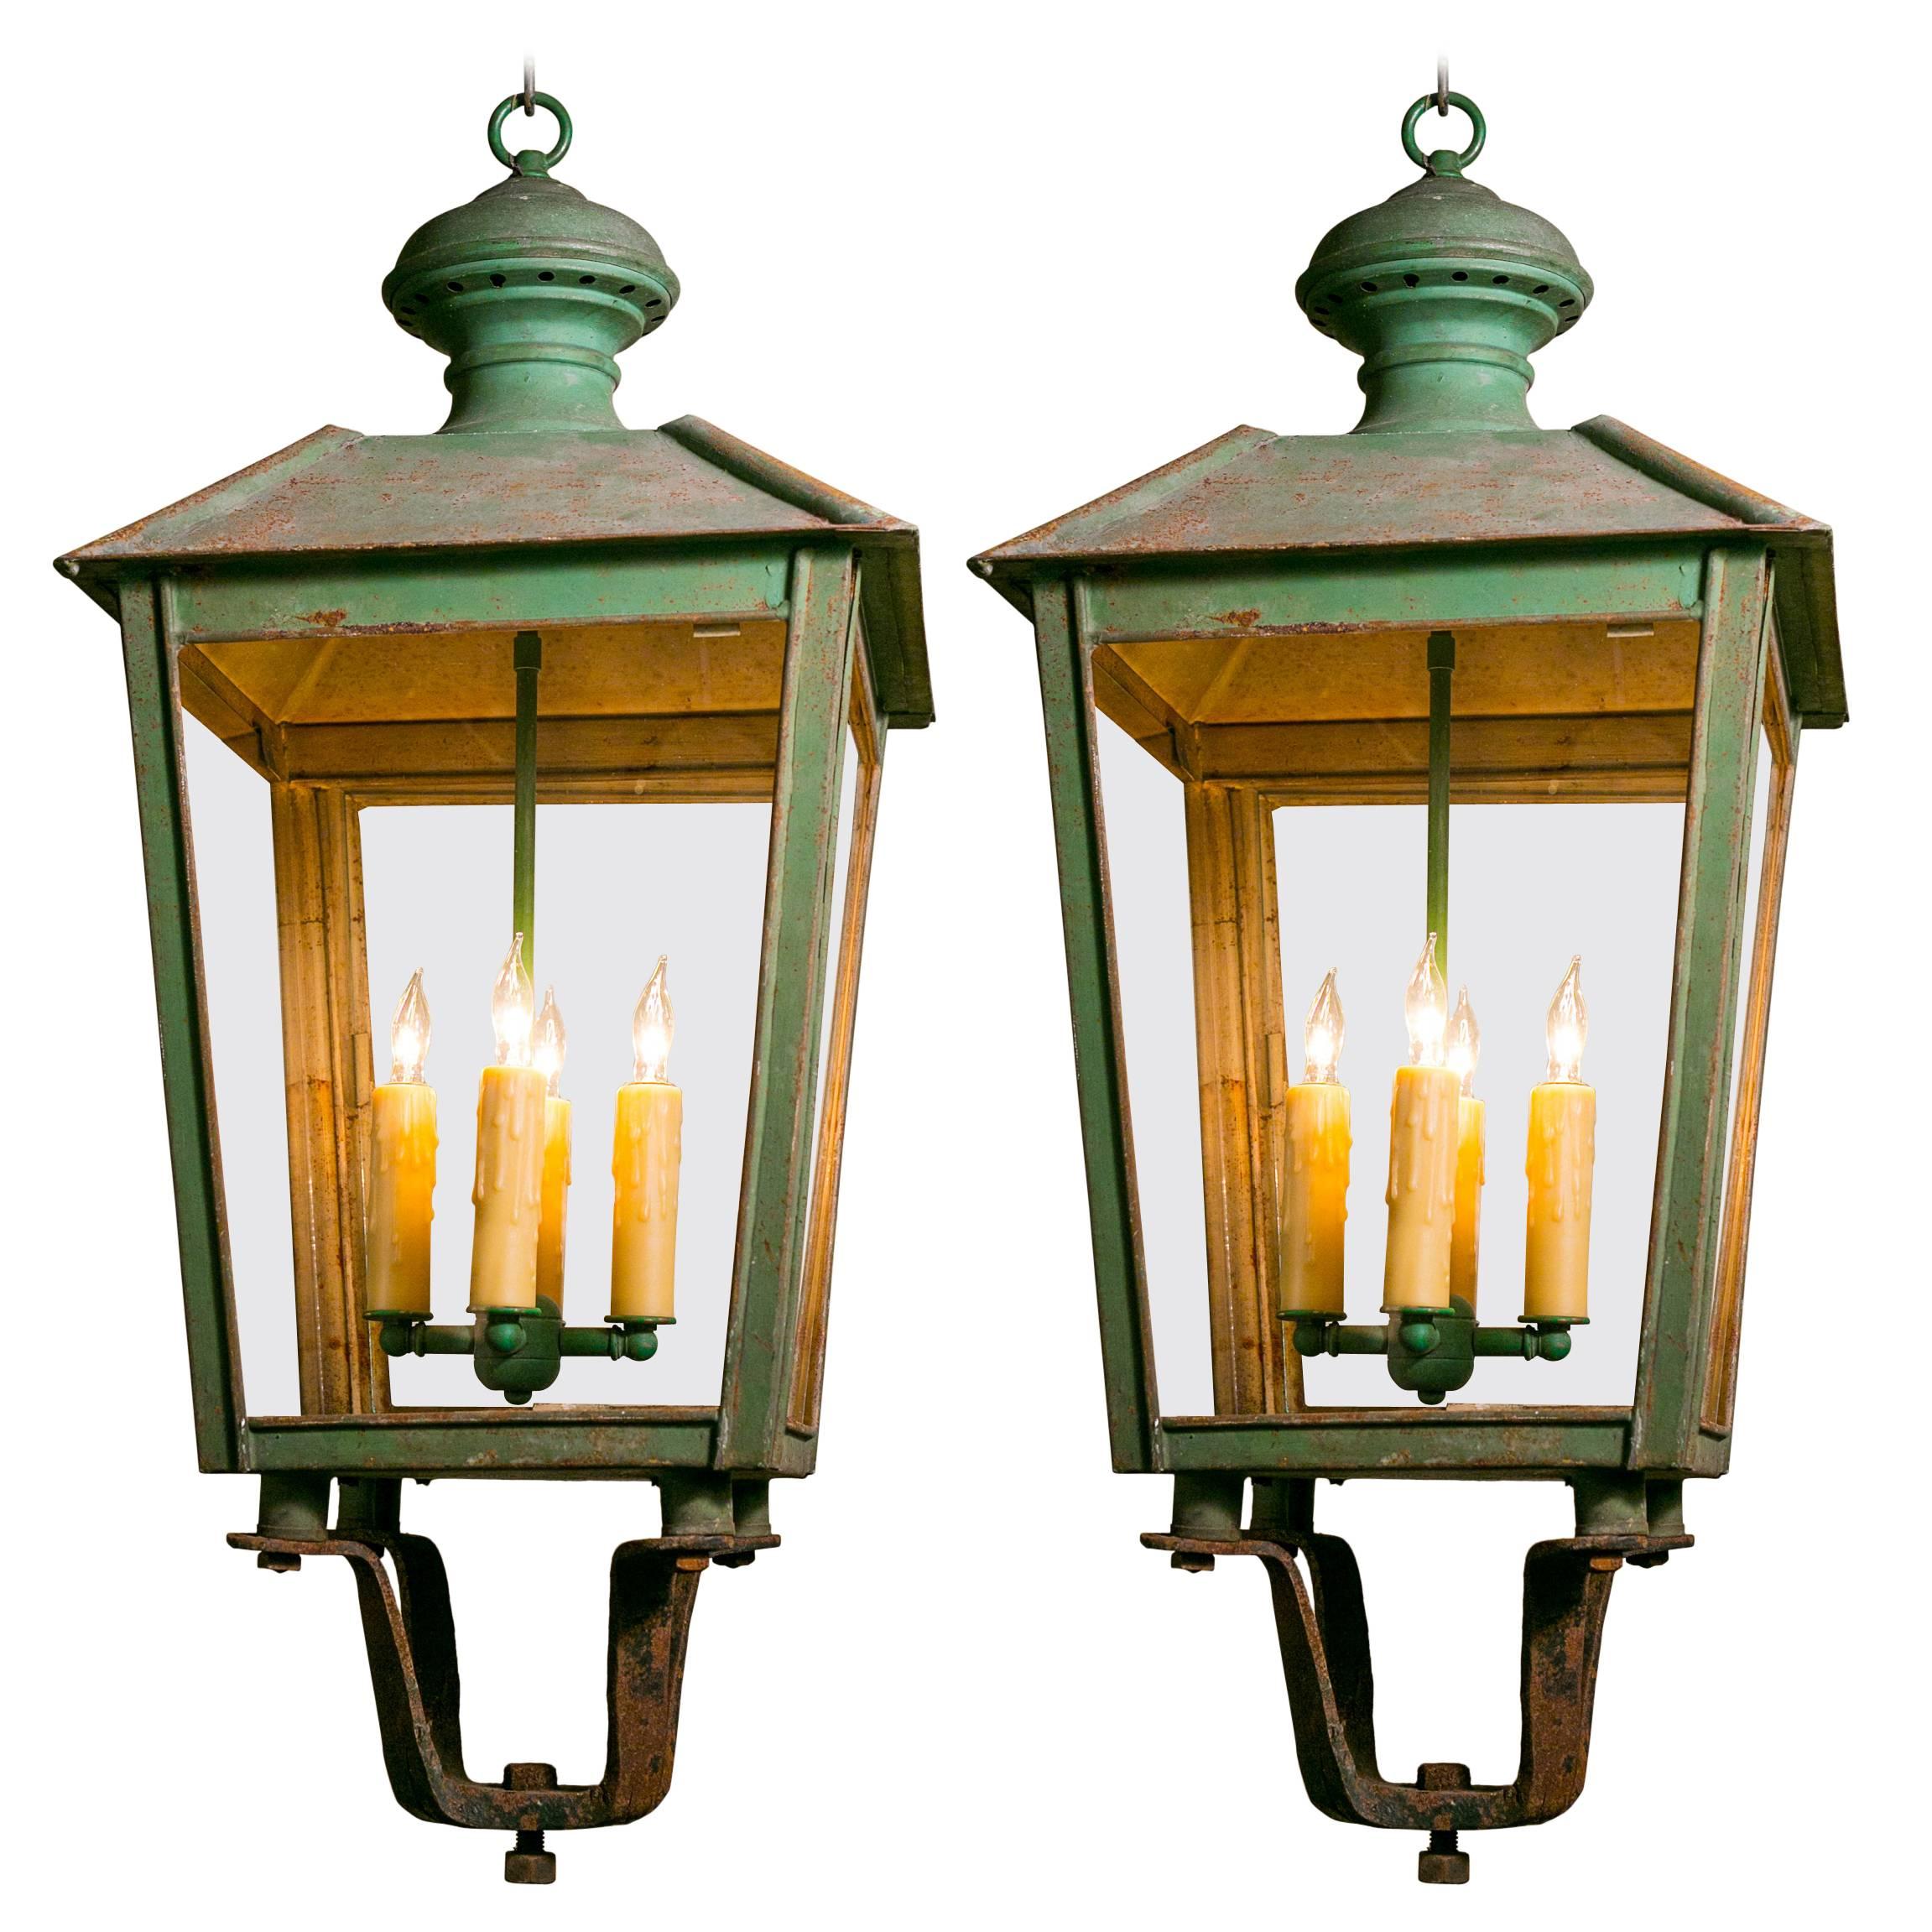 Pair of Vintage FrenchTole Lanterns with Glass Panels